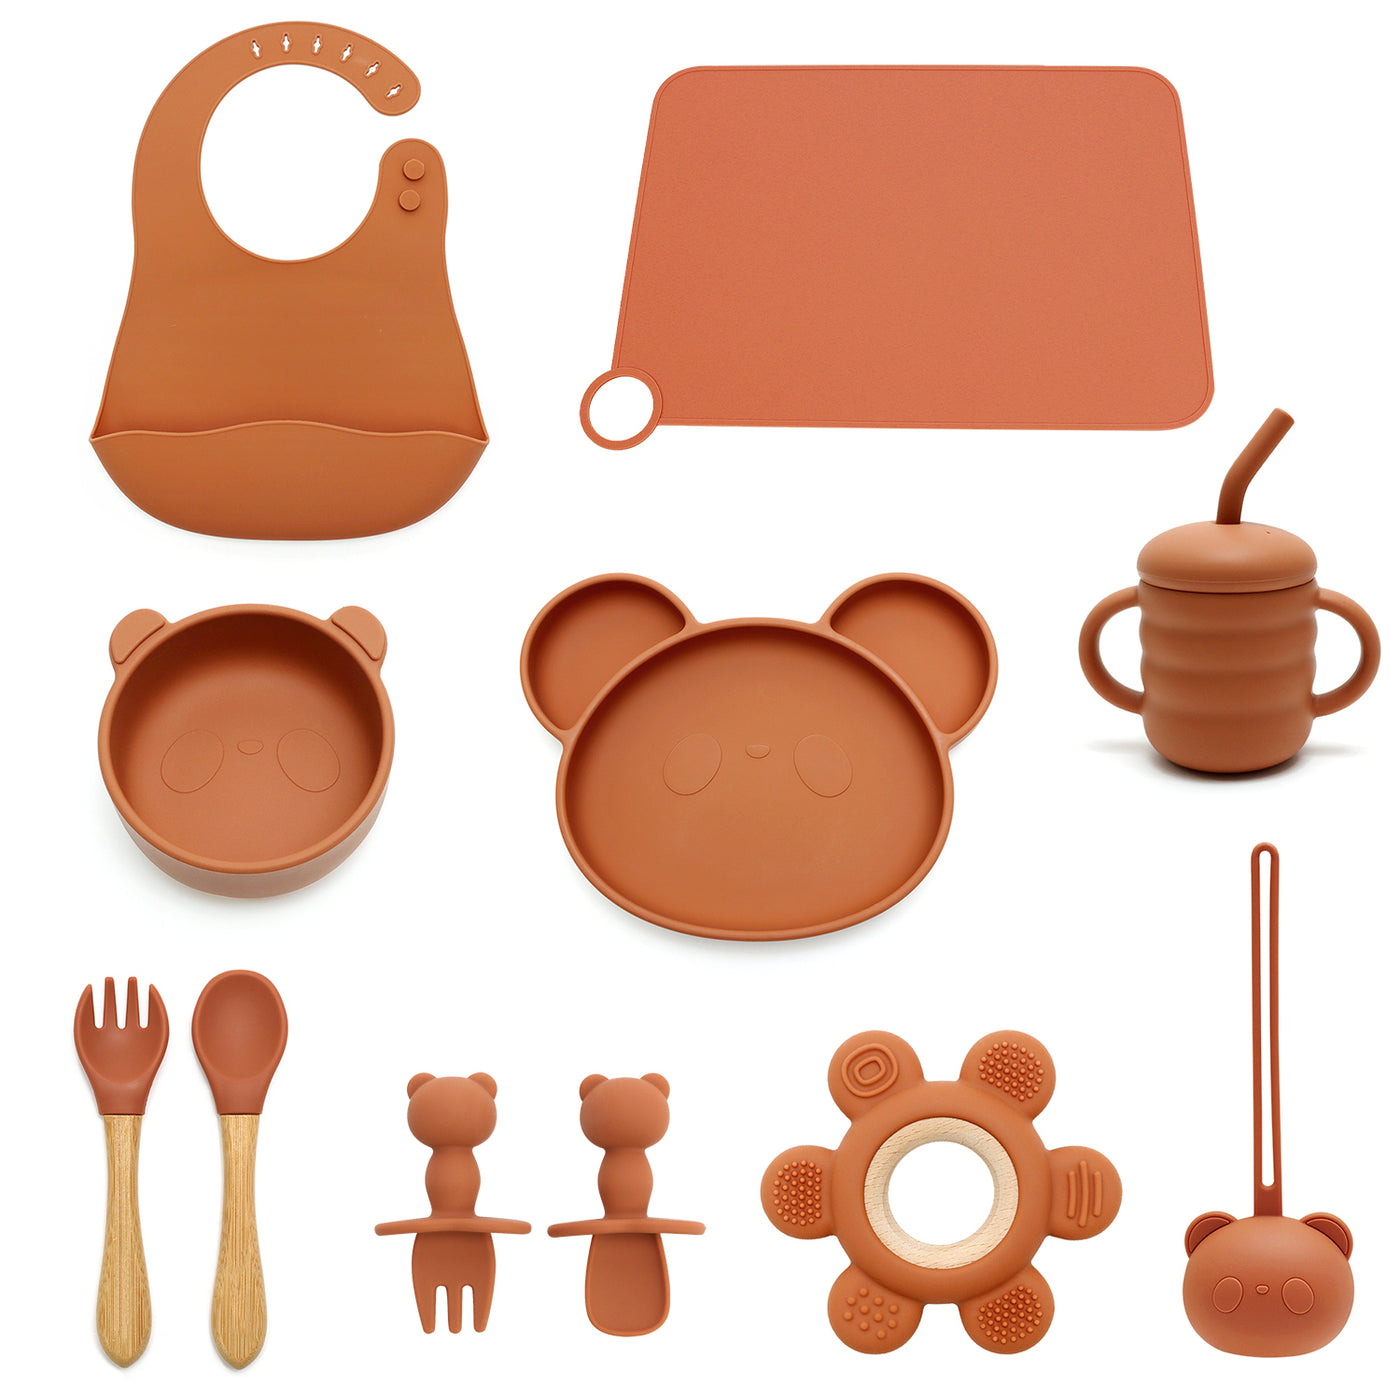 TERRACOTTA 11 PIECE SILICONE BABY AND TODDLER NON-SLIP SUCTION CUP FEEDING SET